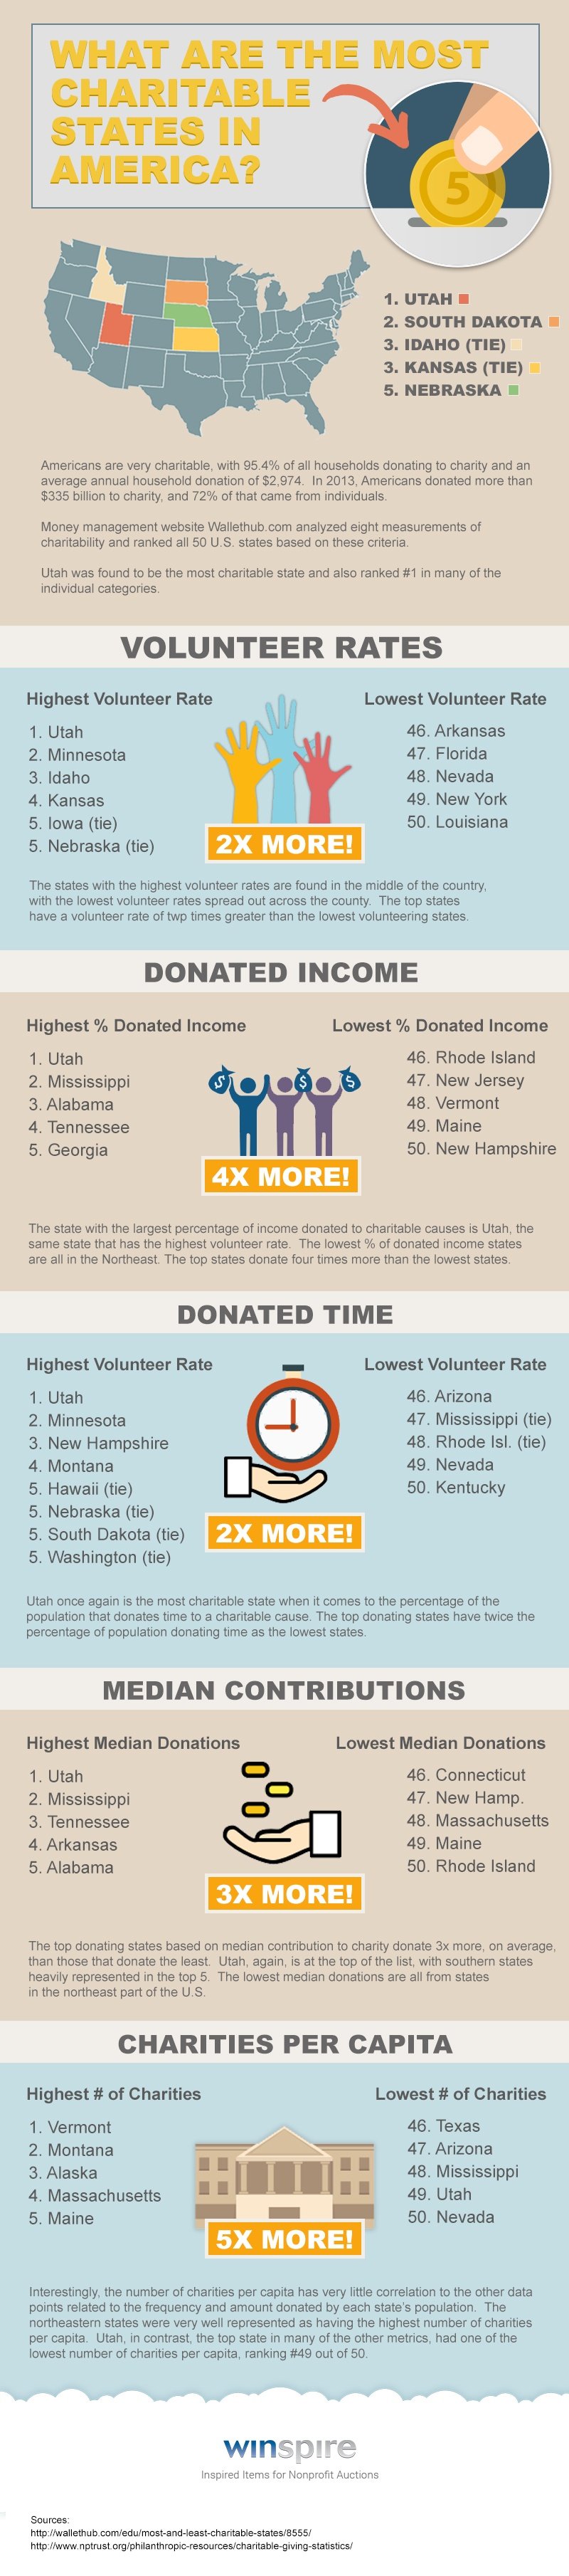 winspire-most-charitable-states-INFOGRAPHIC.jpg